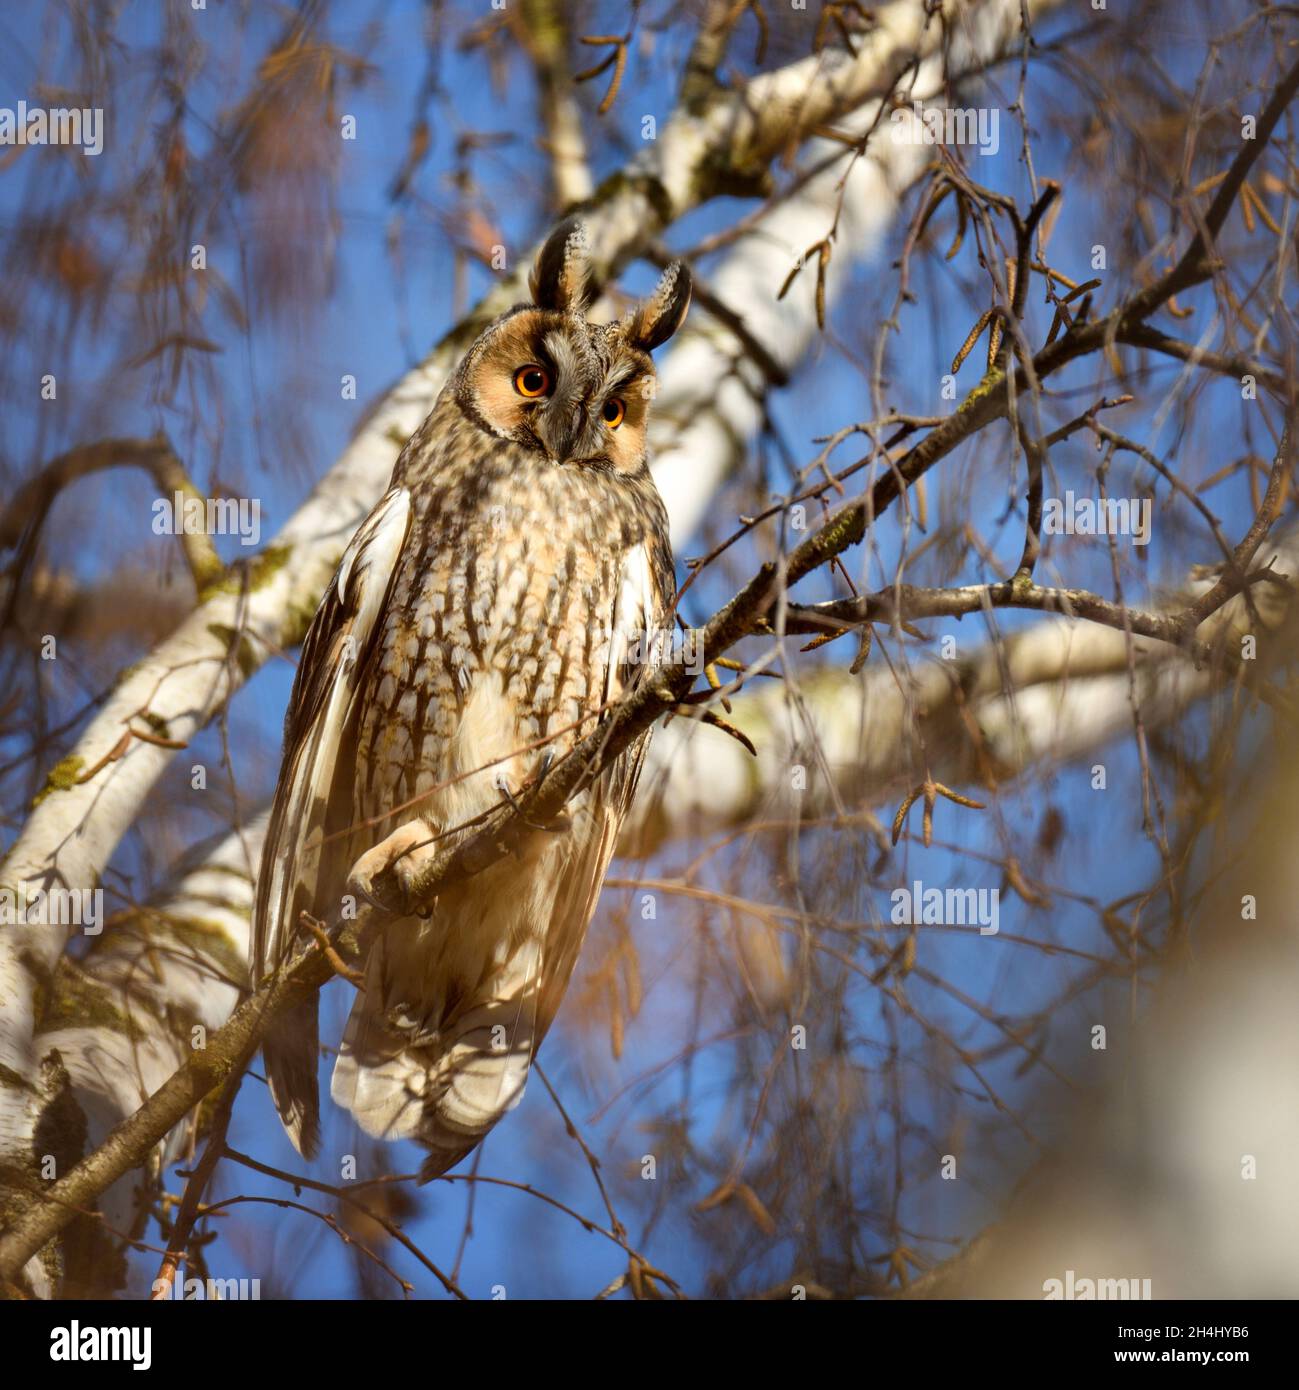 A Long-eared Owl (Asio otus) sitting on a tree against the blue sky. Sunny day Stock Photo